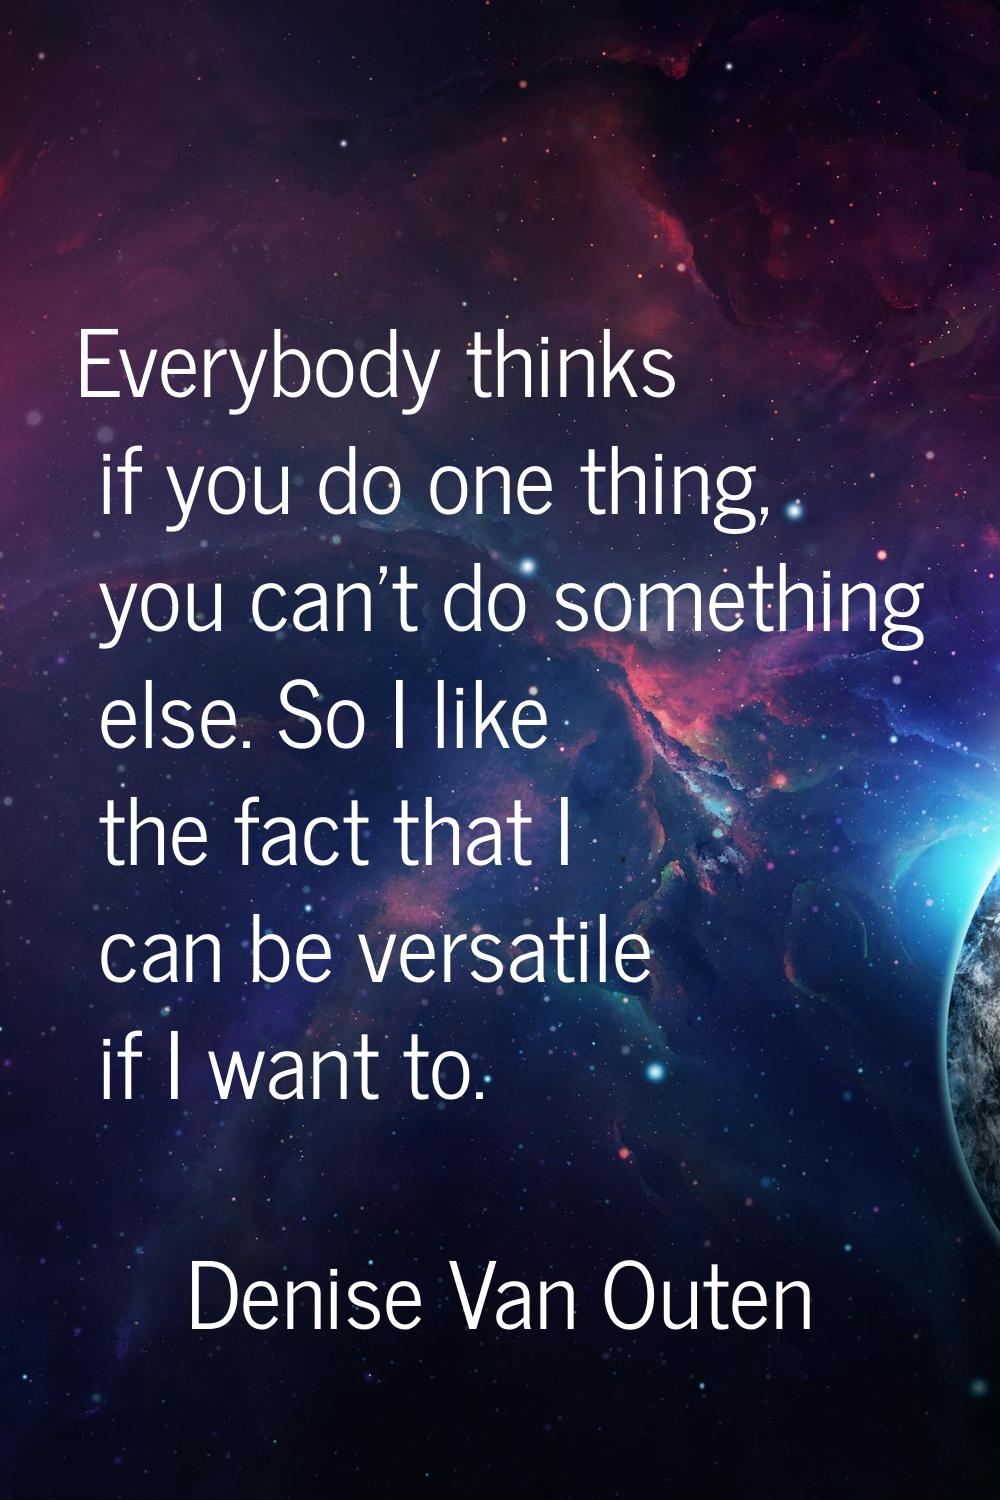 Everybody thinks if you do one thing, you can't do something else. So I like the fact that I can be